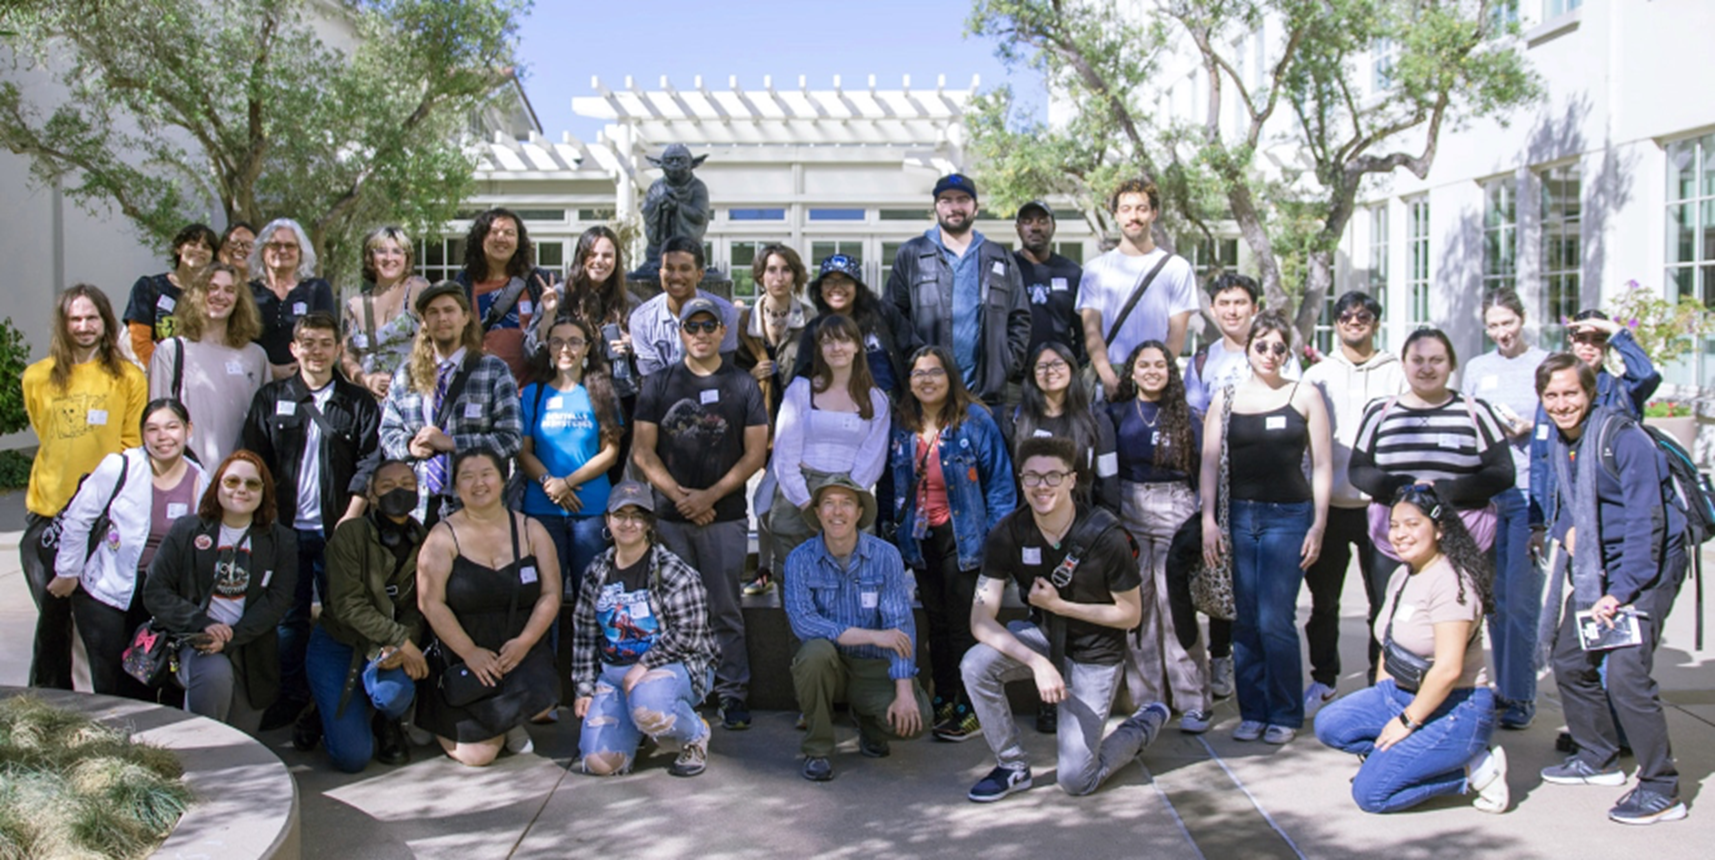 SFSU students and faculty group photo at Lucasfilm